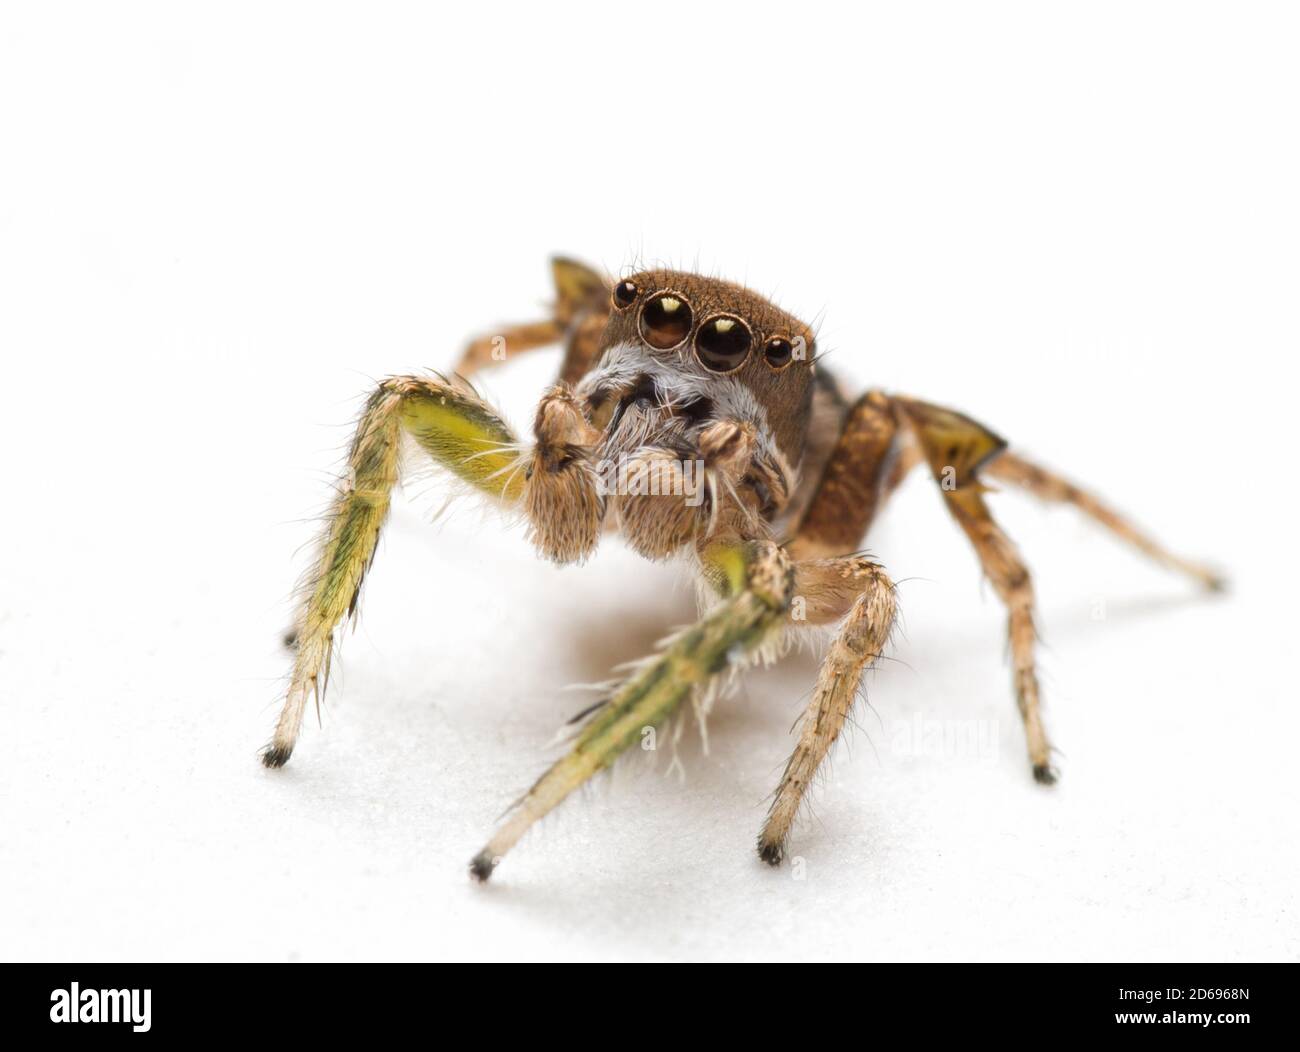 Handsome male Habronattus viripides jumping spider with his fuzzy pedipalps in front of his mouth, looking up, on light background Stock Photo